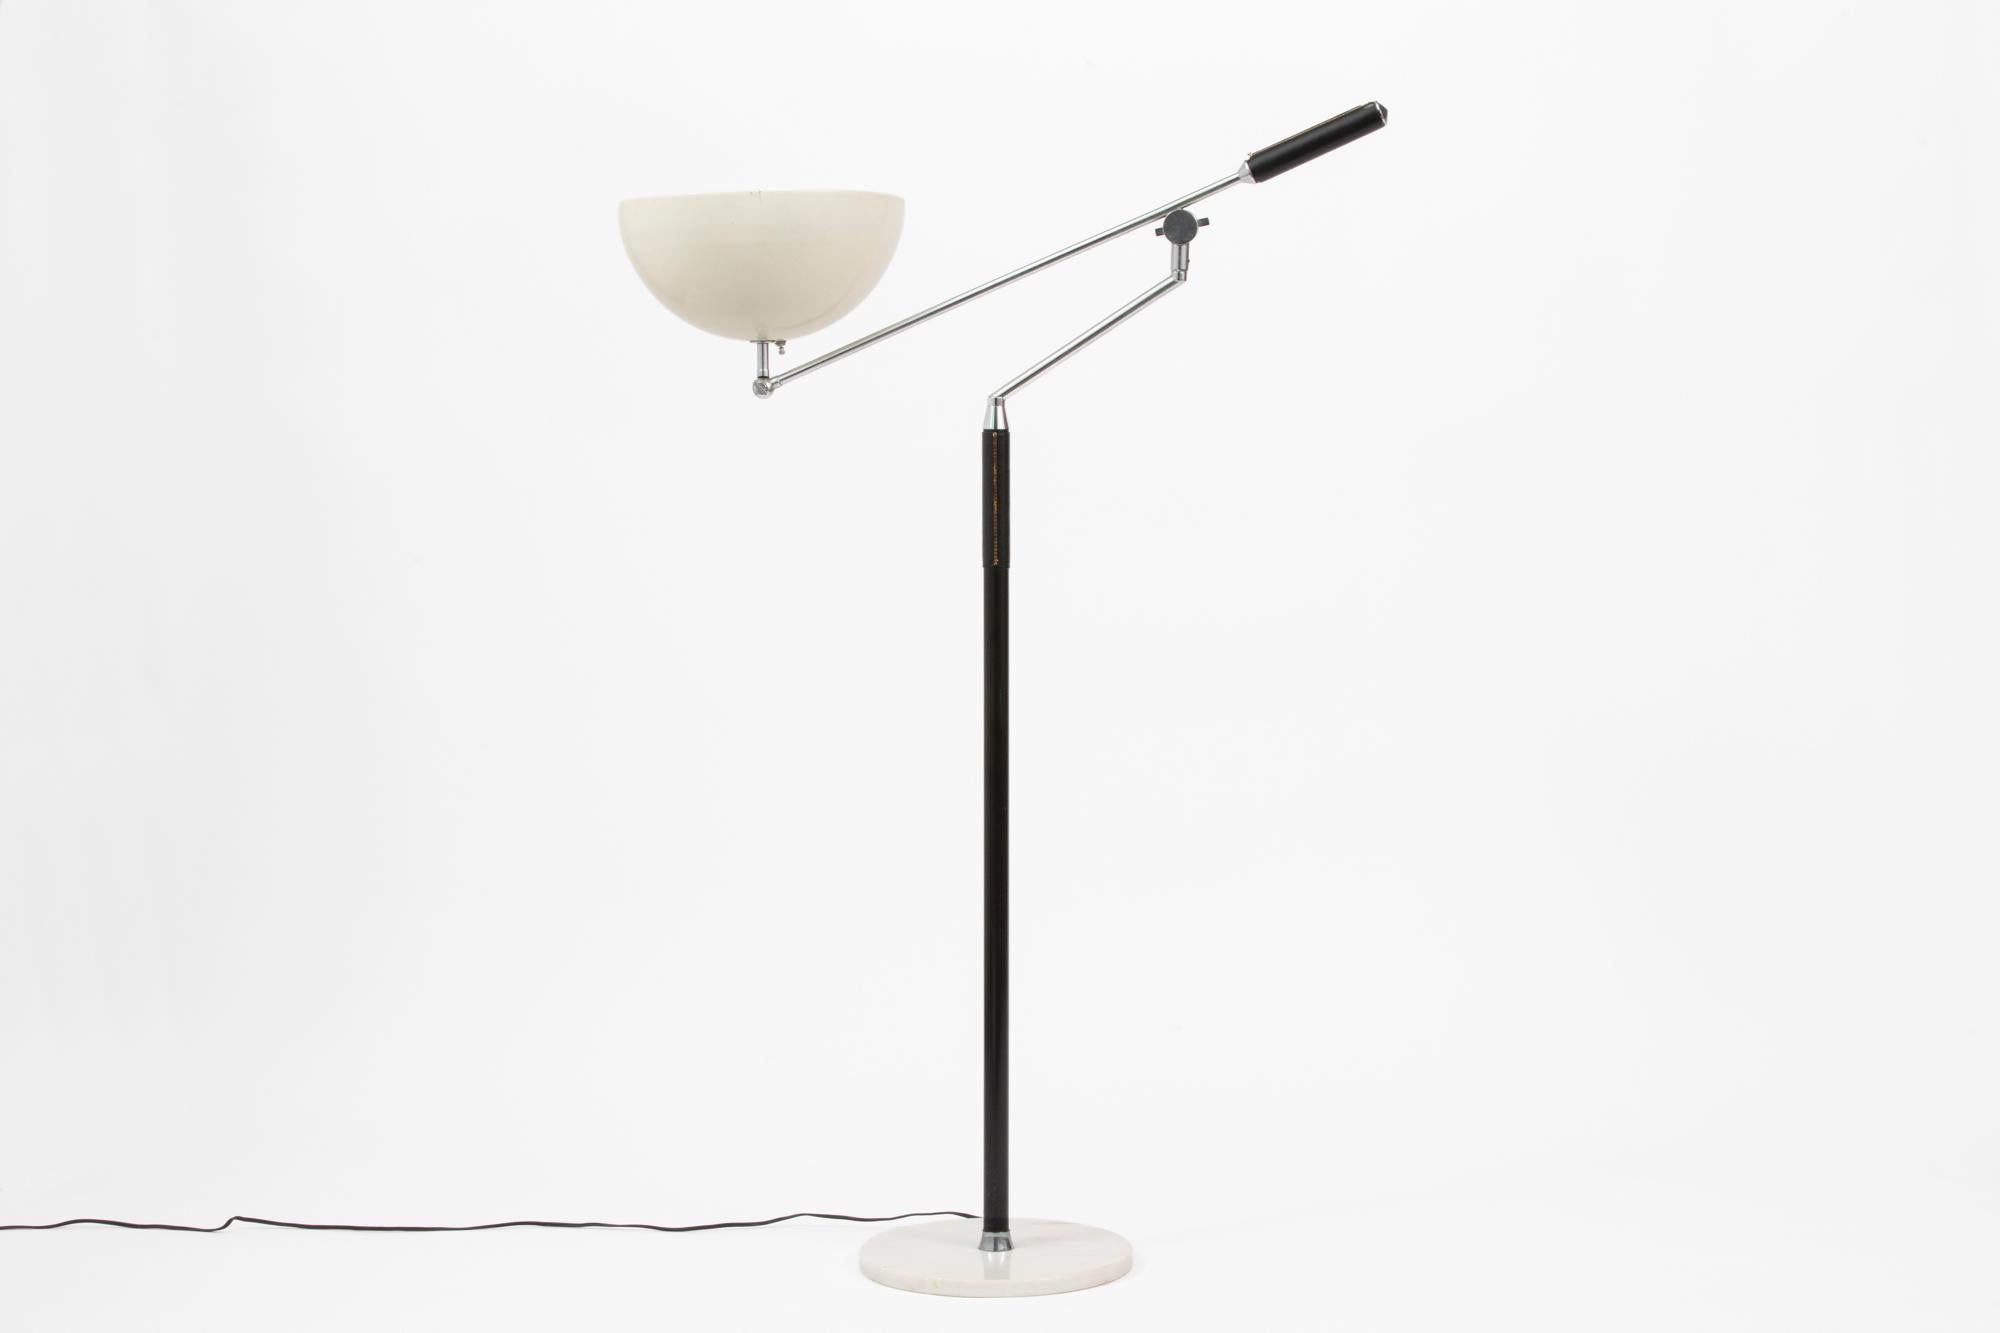 This unusual articulated, infinitely adjustable modernist vintage Italian floor lamp was distributed by Koch & Lowy during the 1960s and attributed to the manufacturer Arredoluce. It would make a great reading lamp as well as being great for